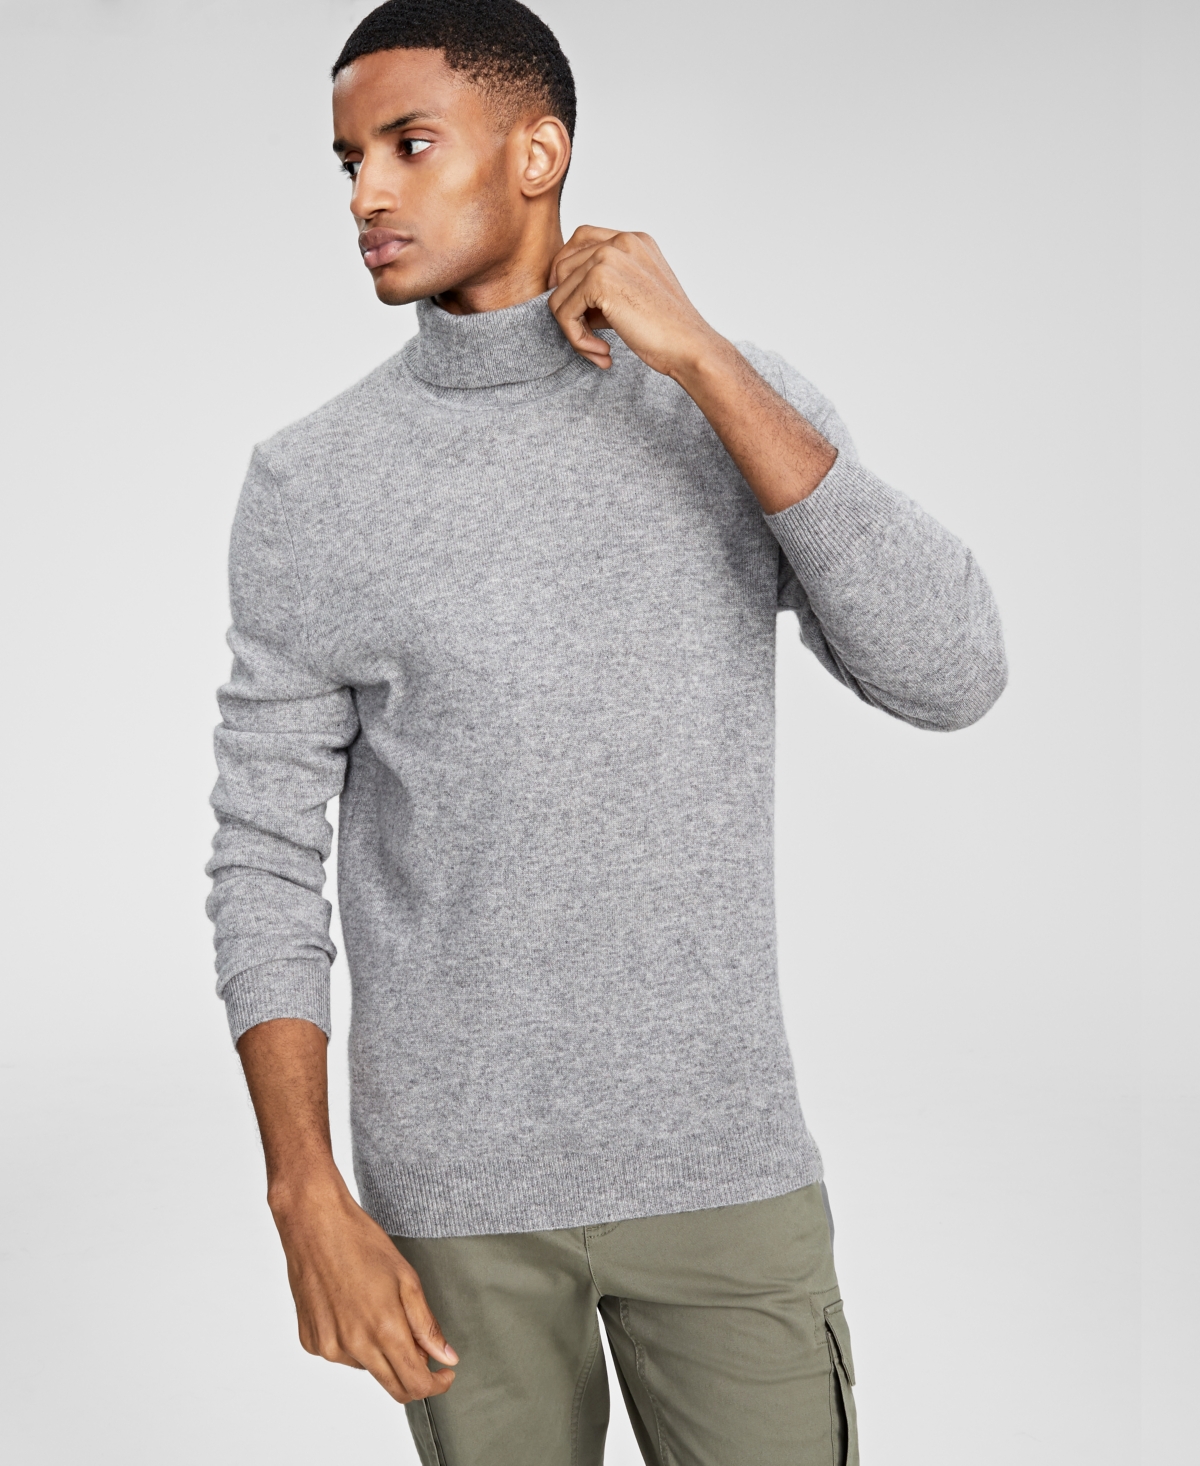 Club Room Men's Cashmere Turtleneck Sweater, Created for Macy's